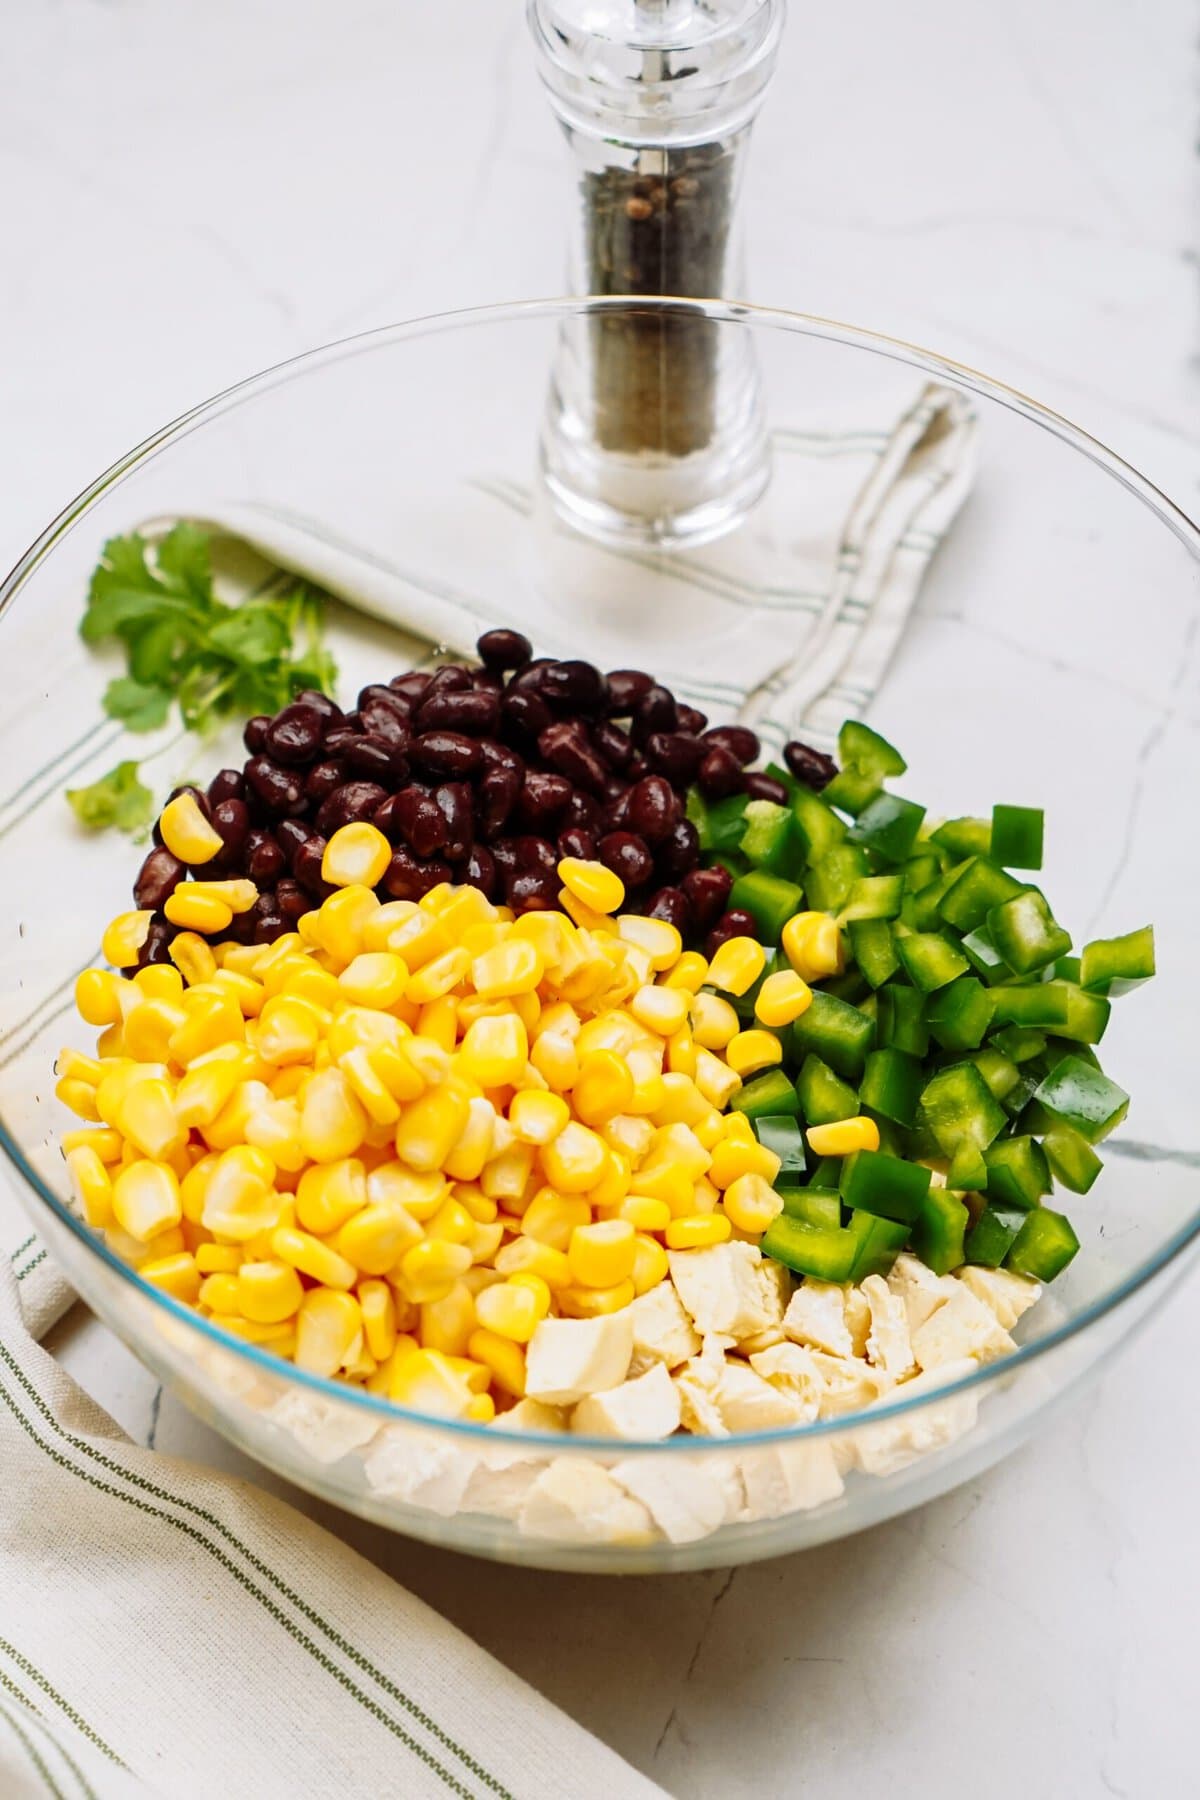 Ingredients for a mixed bean and vegetable southwest salad arranged separately in a glass bowl before mixing.